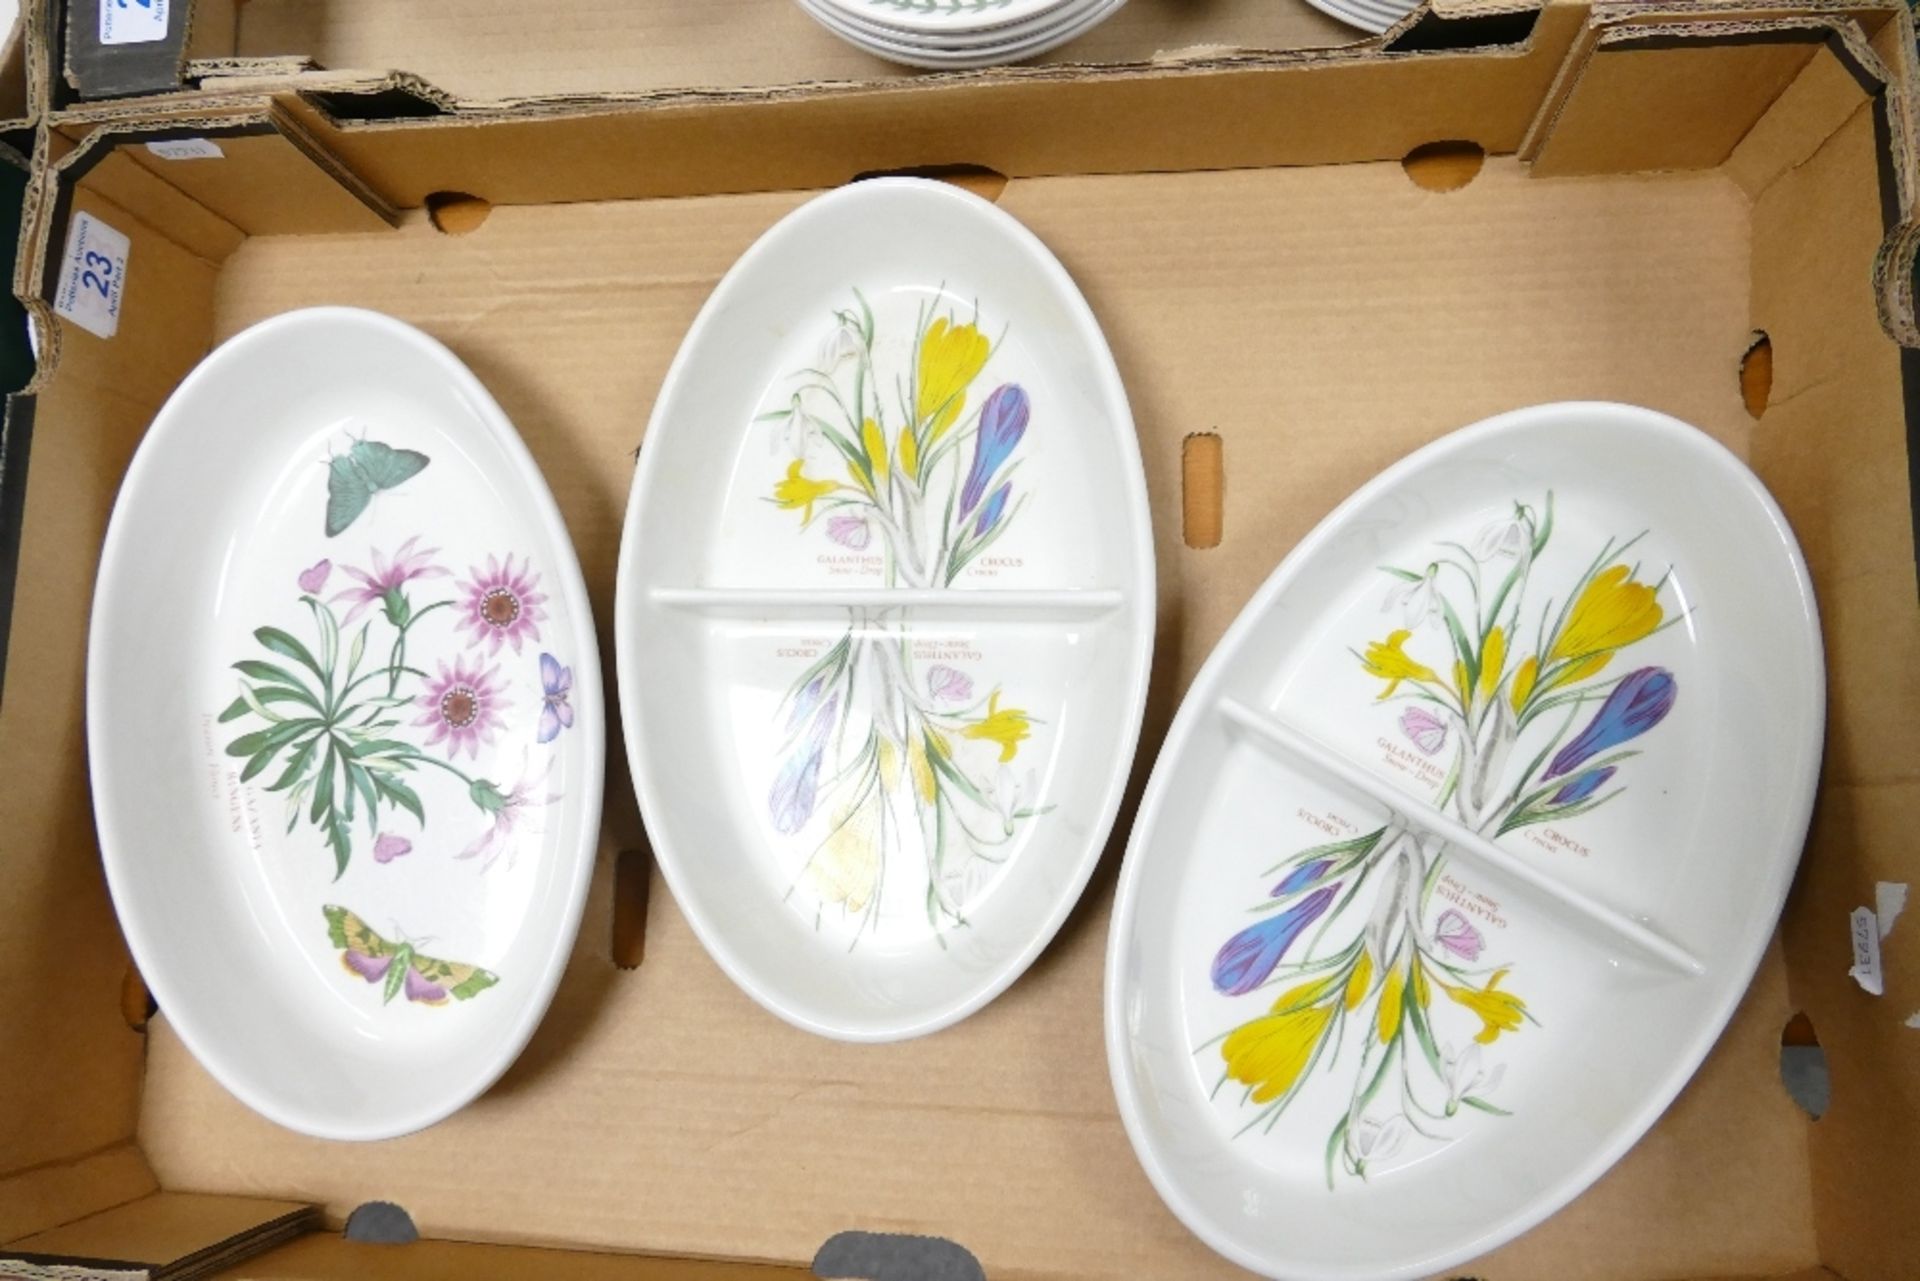 A collection of Portmeirion Botanic patterned items including 3 two sectional serving dishes